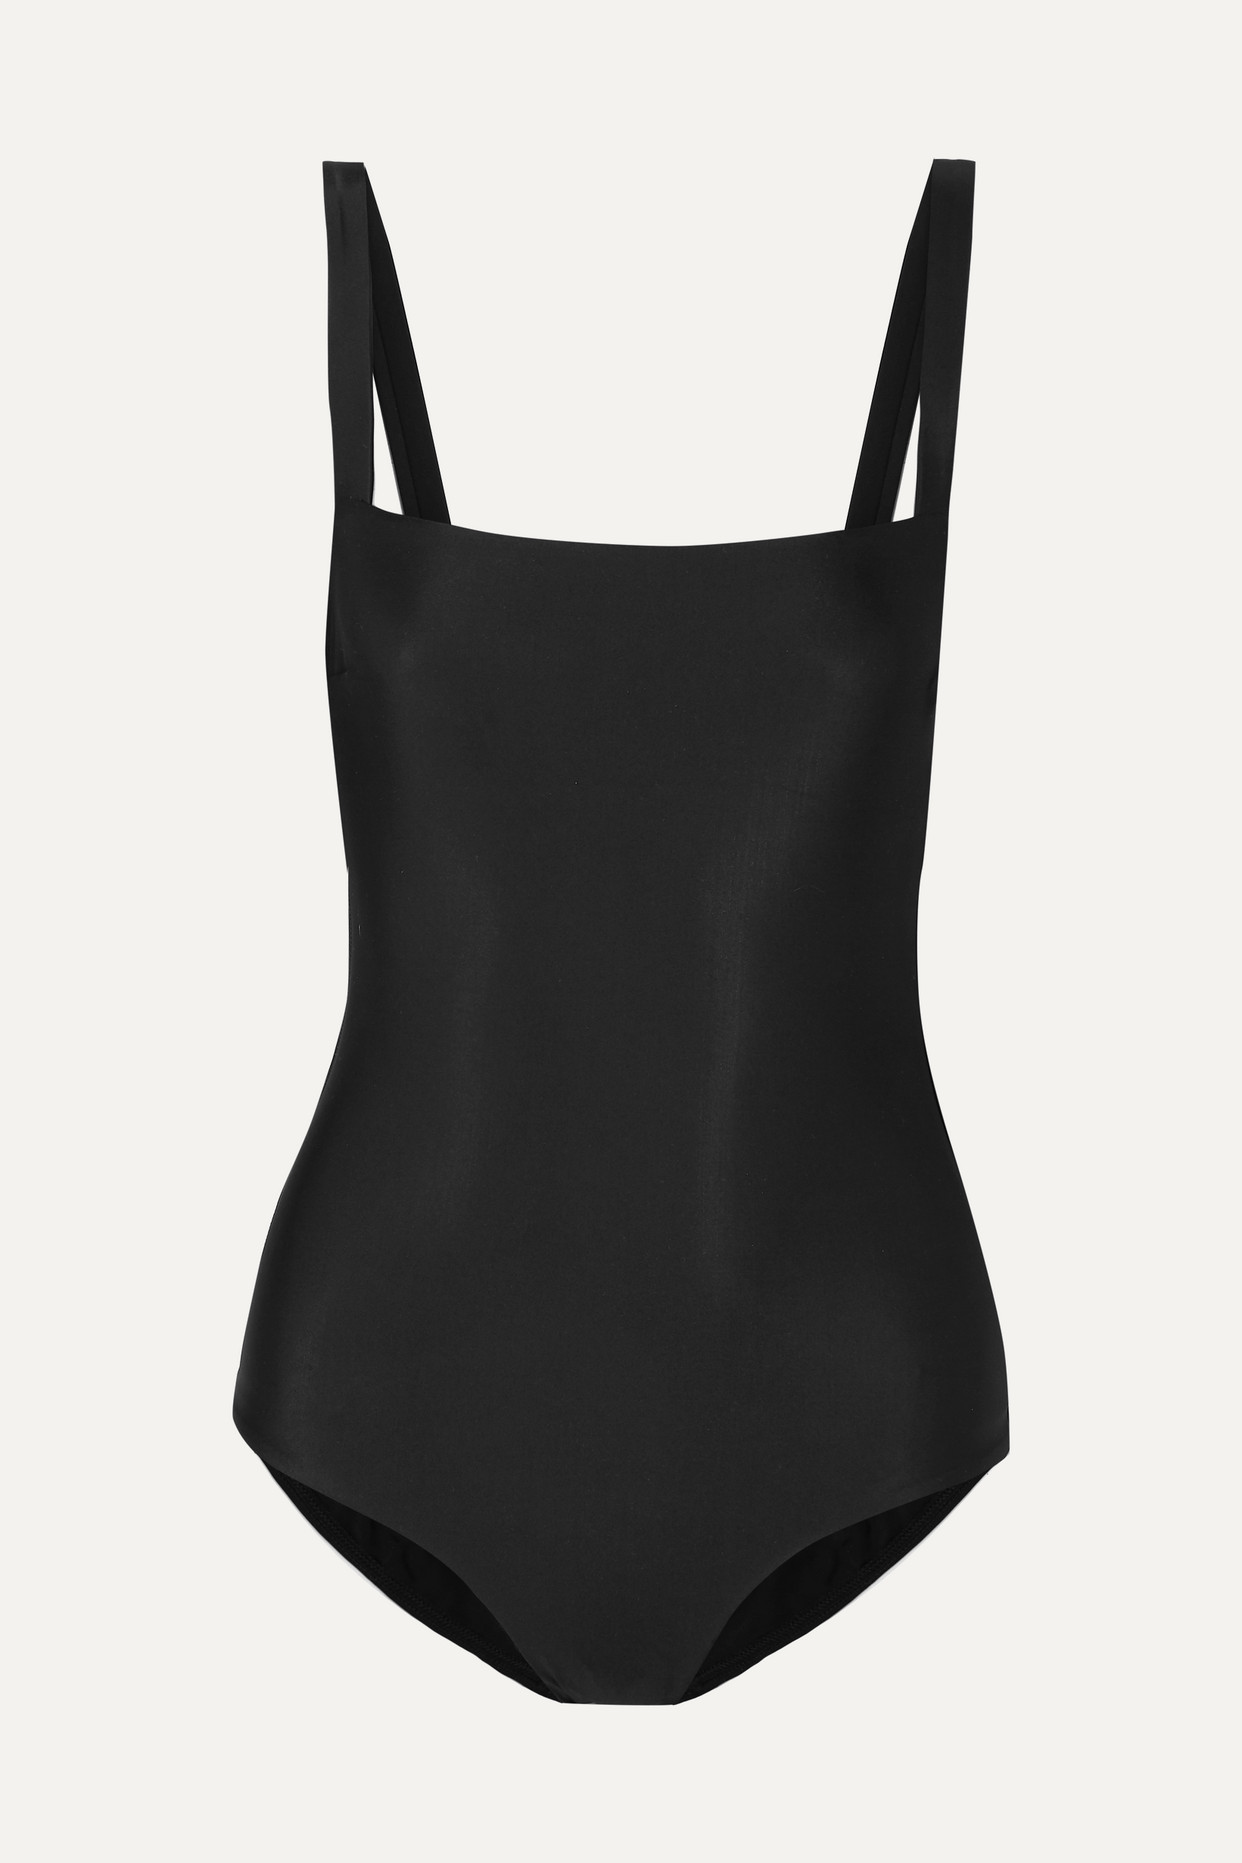 The Square Swimsuit